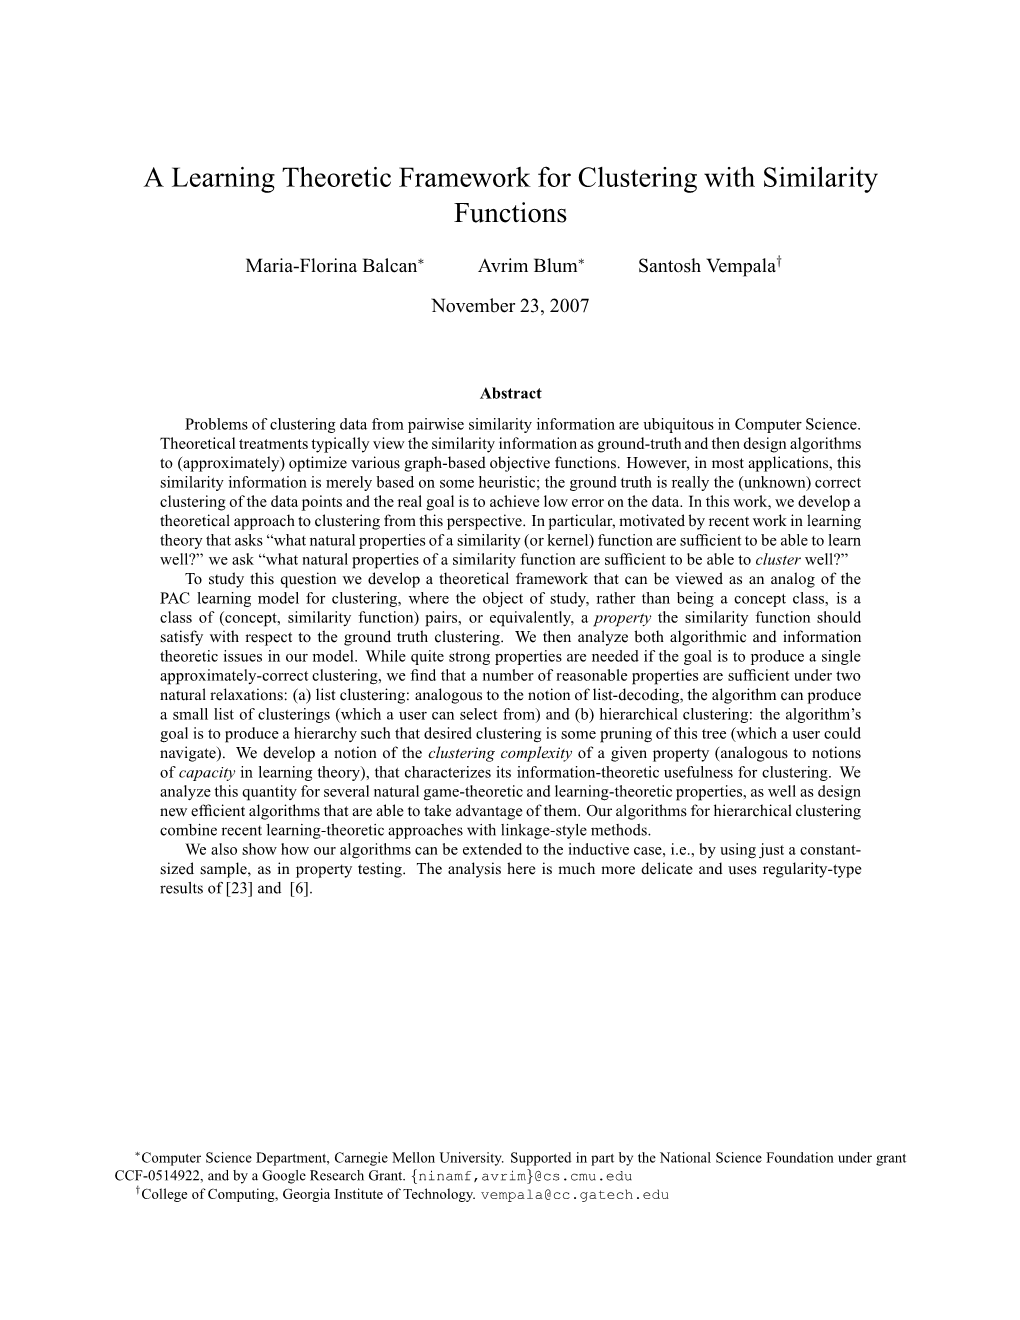 A Learning Theoretic Framework for Clustering with Similarity Functions